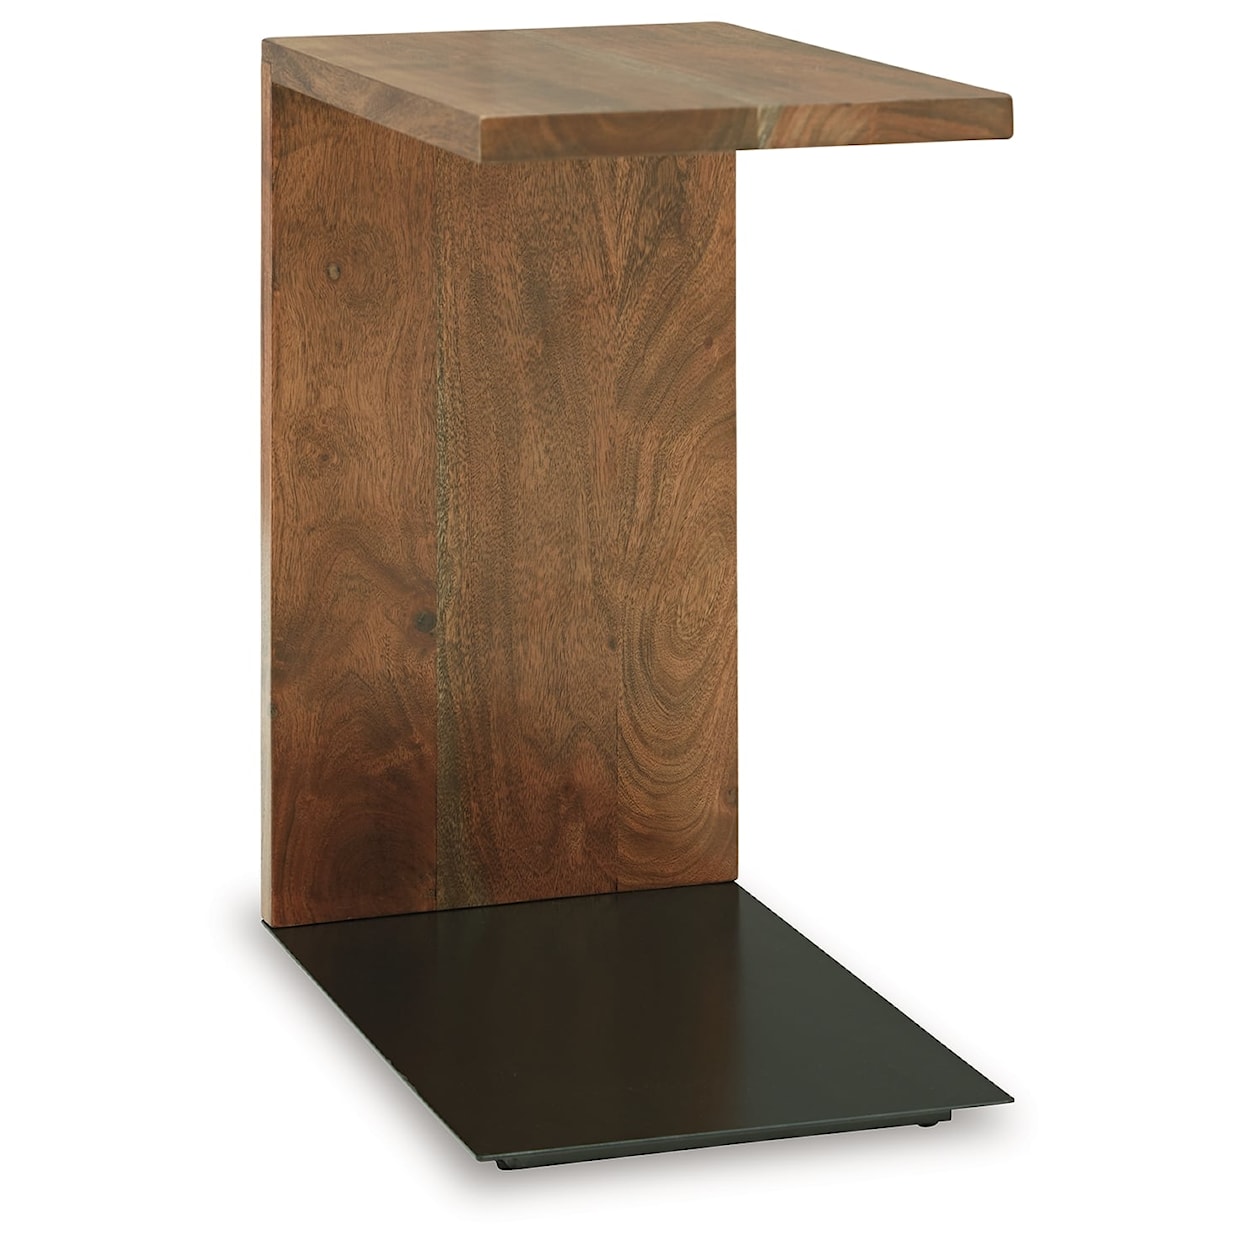 Benchcraft Wimshaw Accent Table